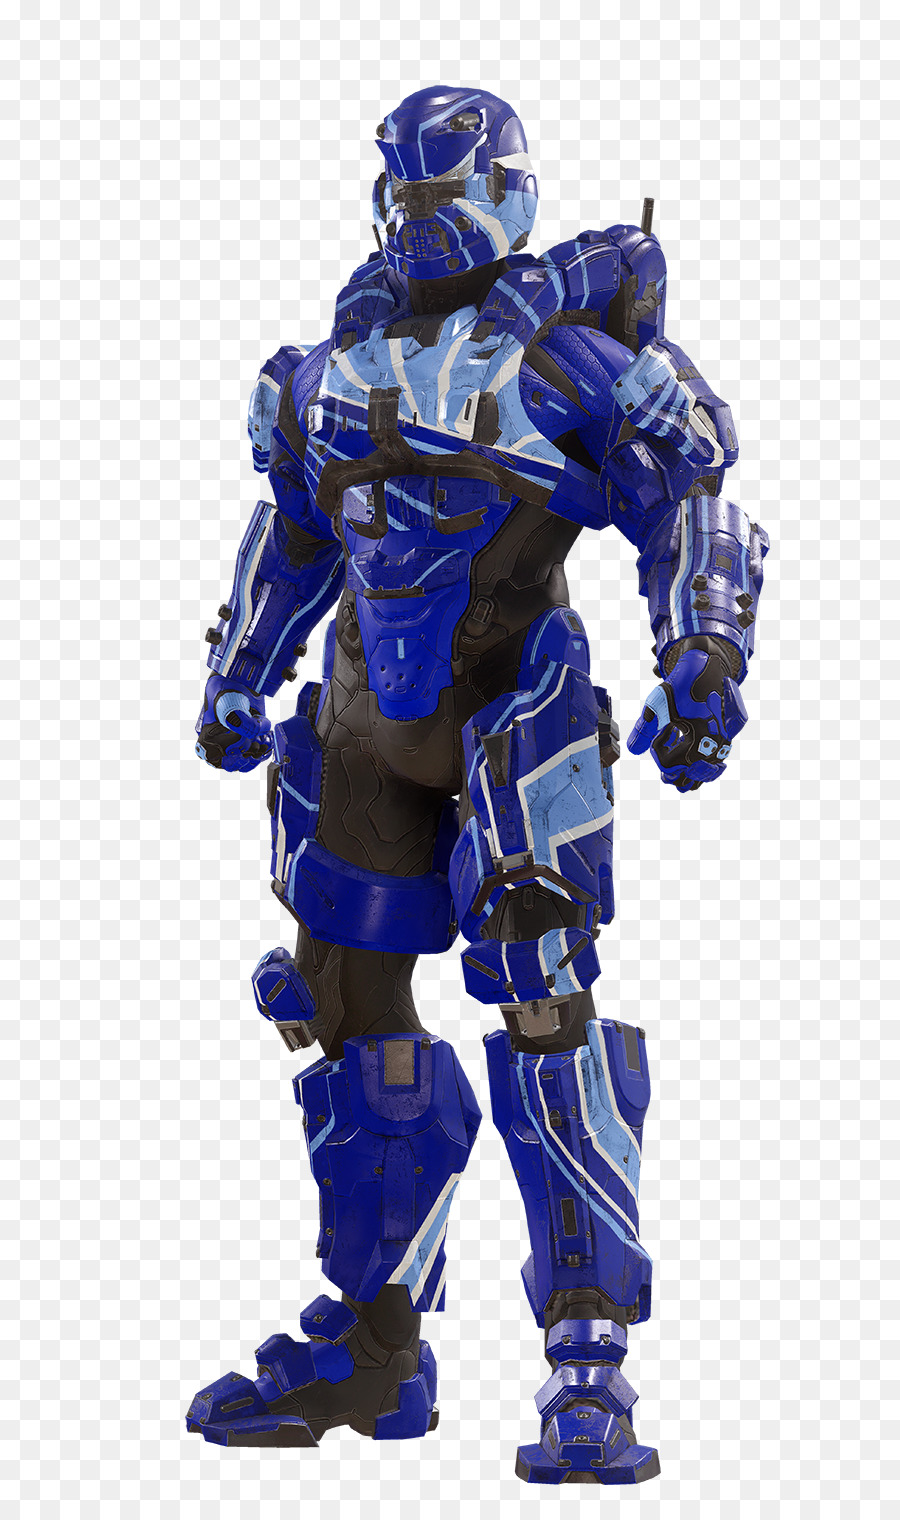 Halo 5 Guardians，Halo Reach PNG